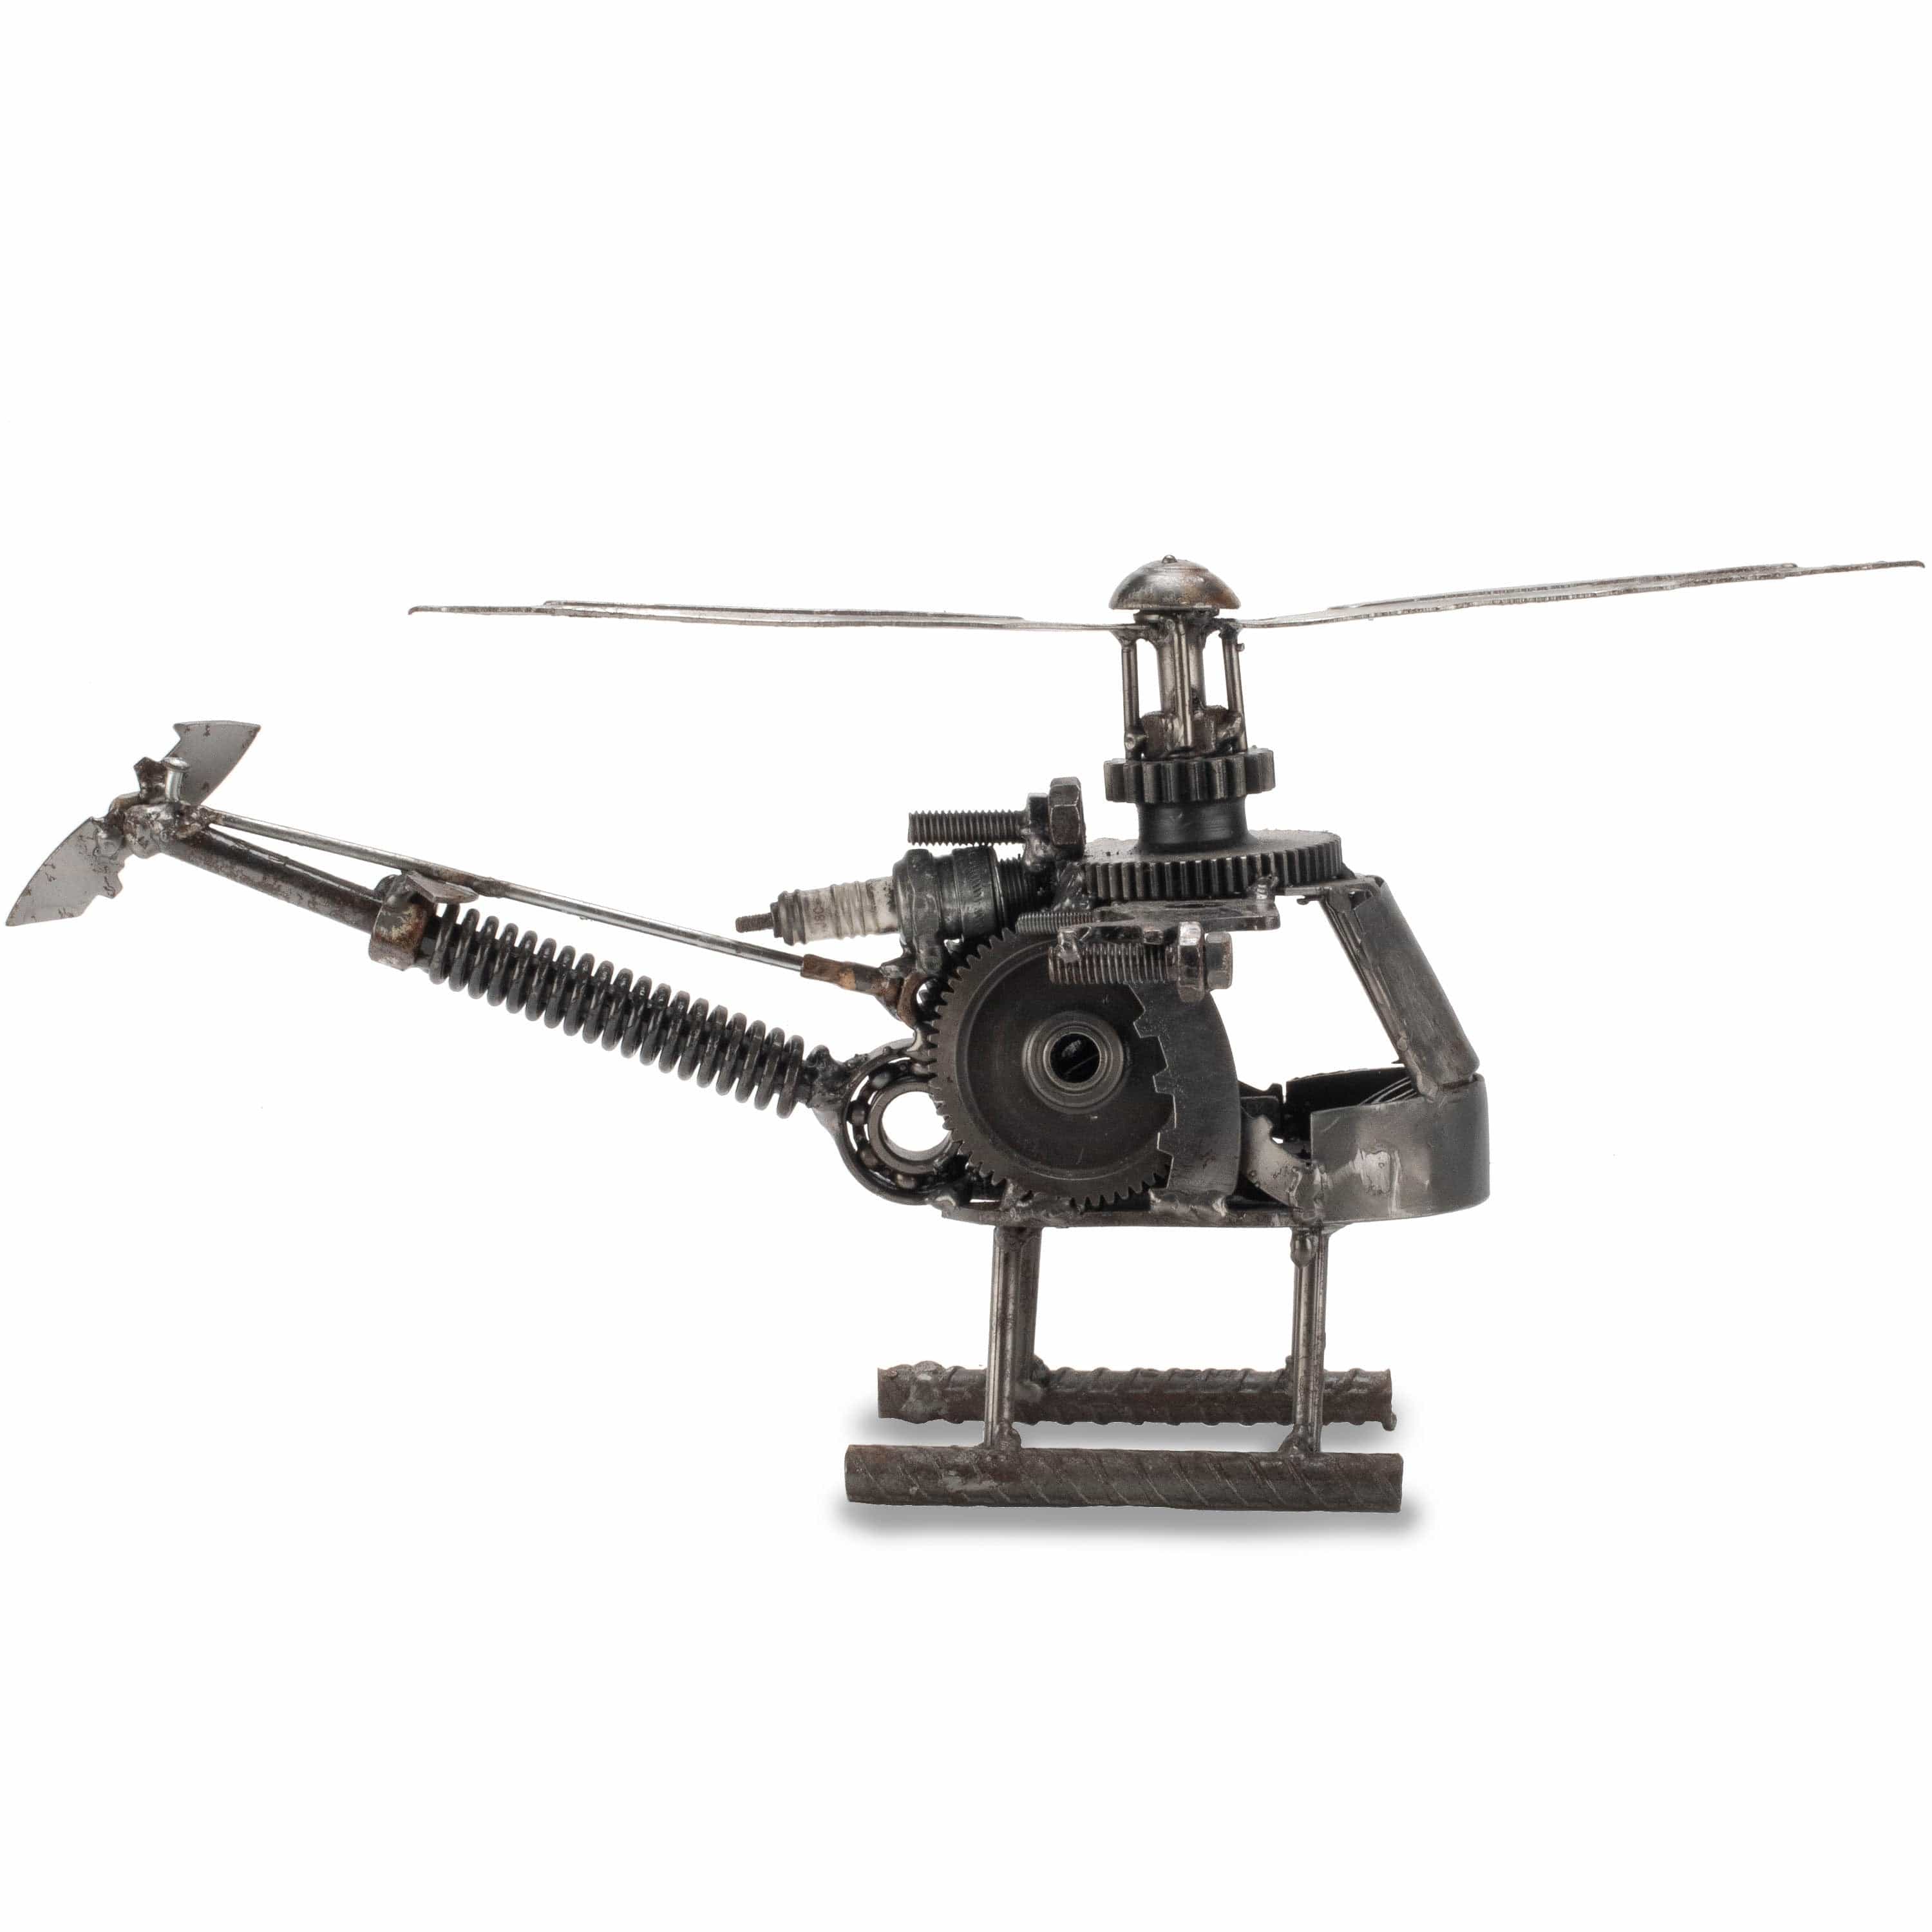 Kalifano Recycled Metal Art Helicopter Inspired Recycled Metal Art Sculpture - RMS-HC15-Y